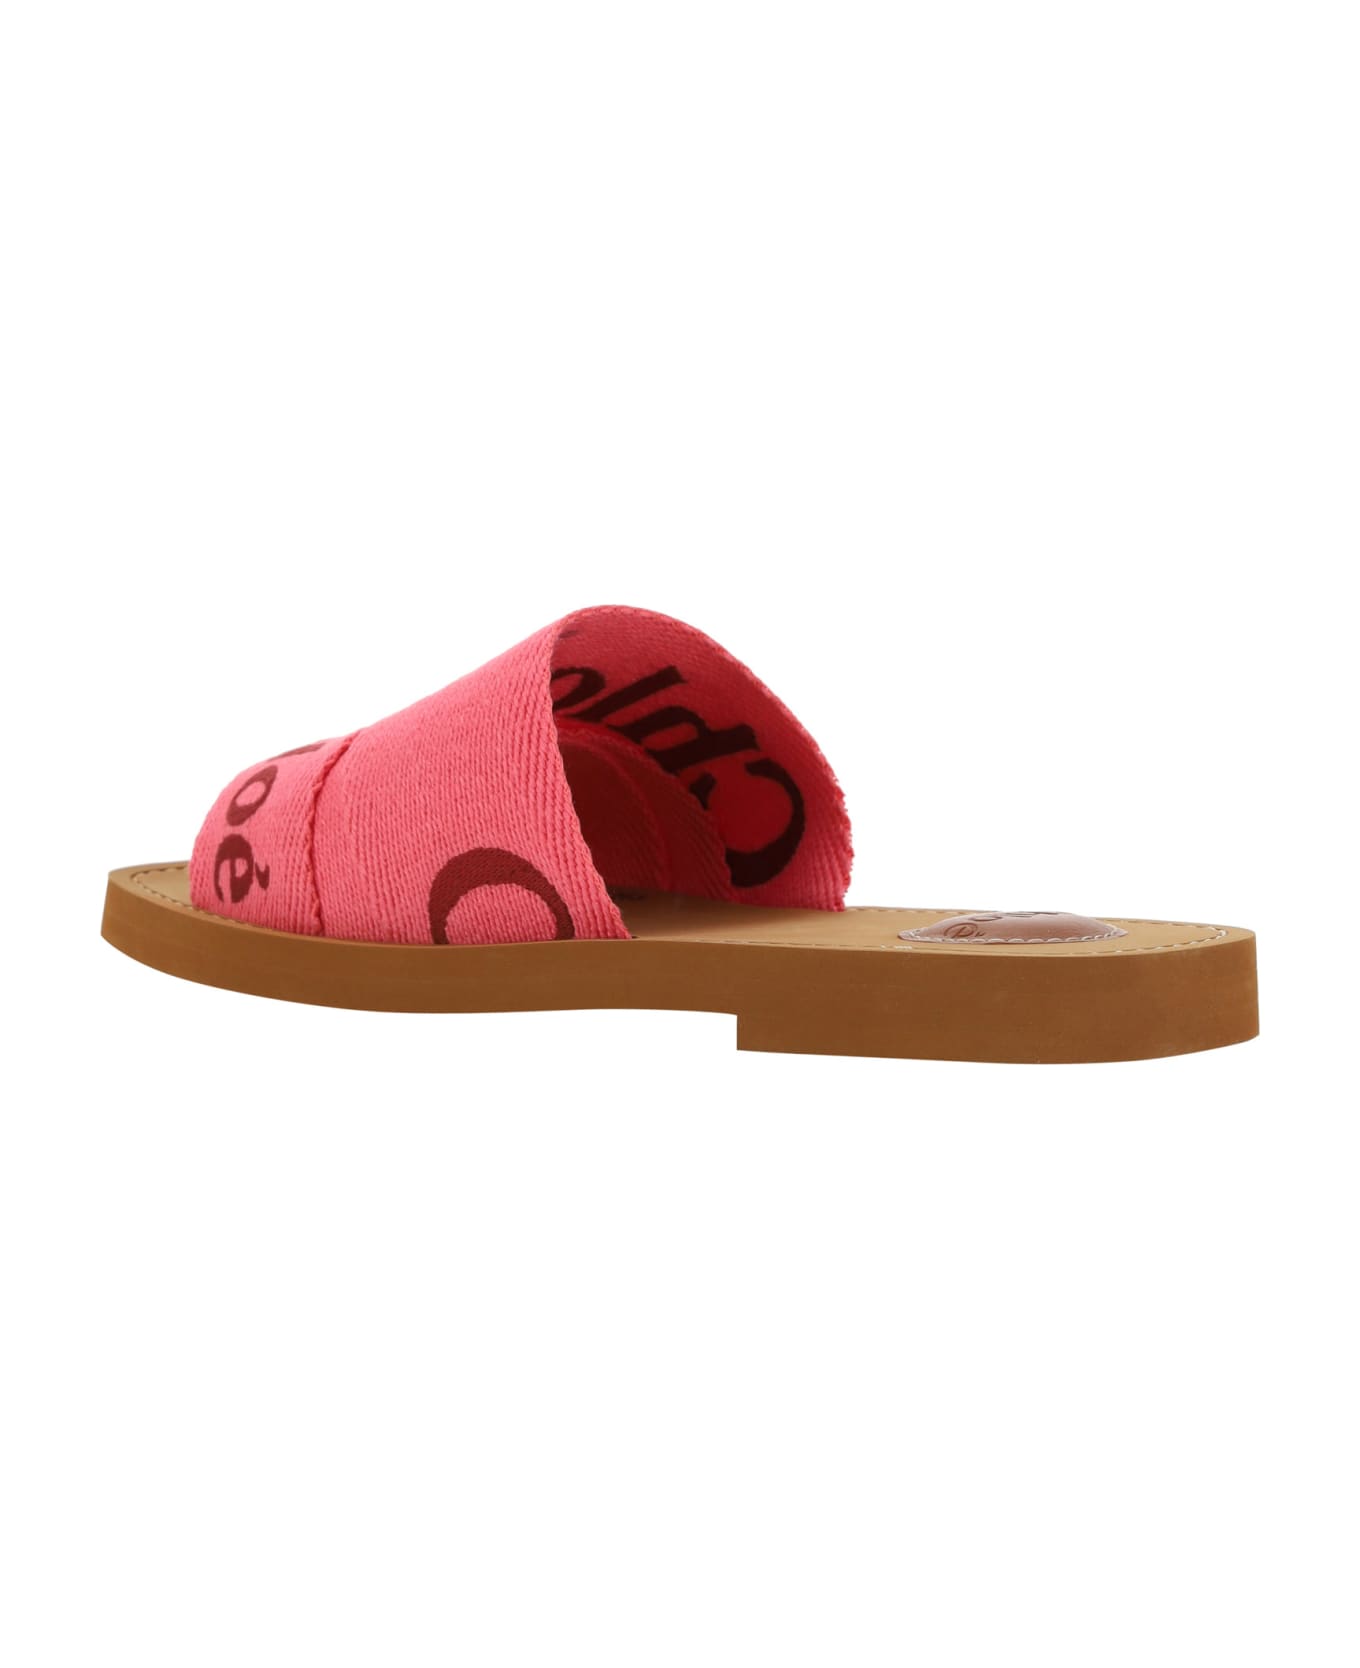 Chloé Woody Sandals - Pink - Red サンダル